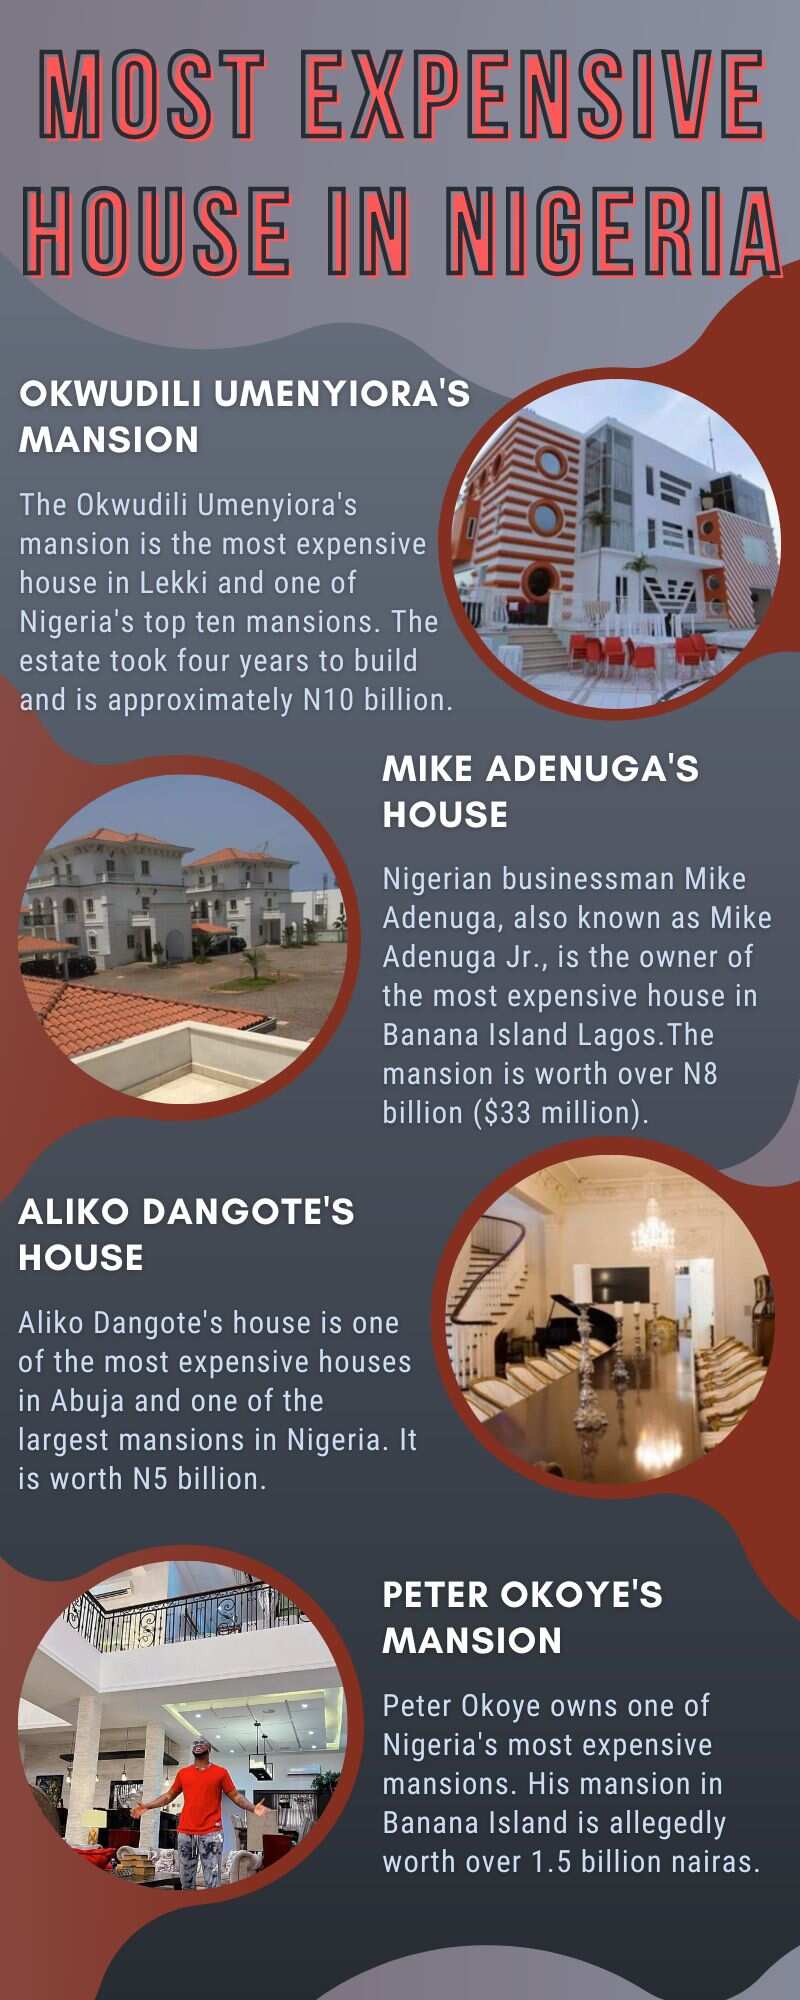 Most expensive house in Nigeria